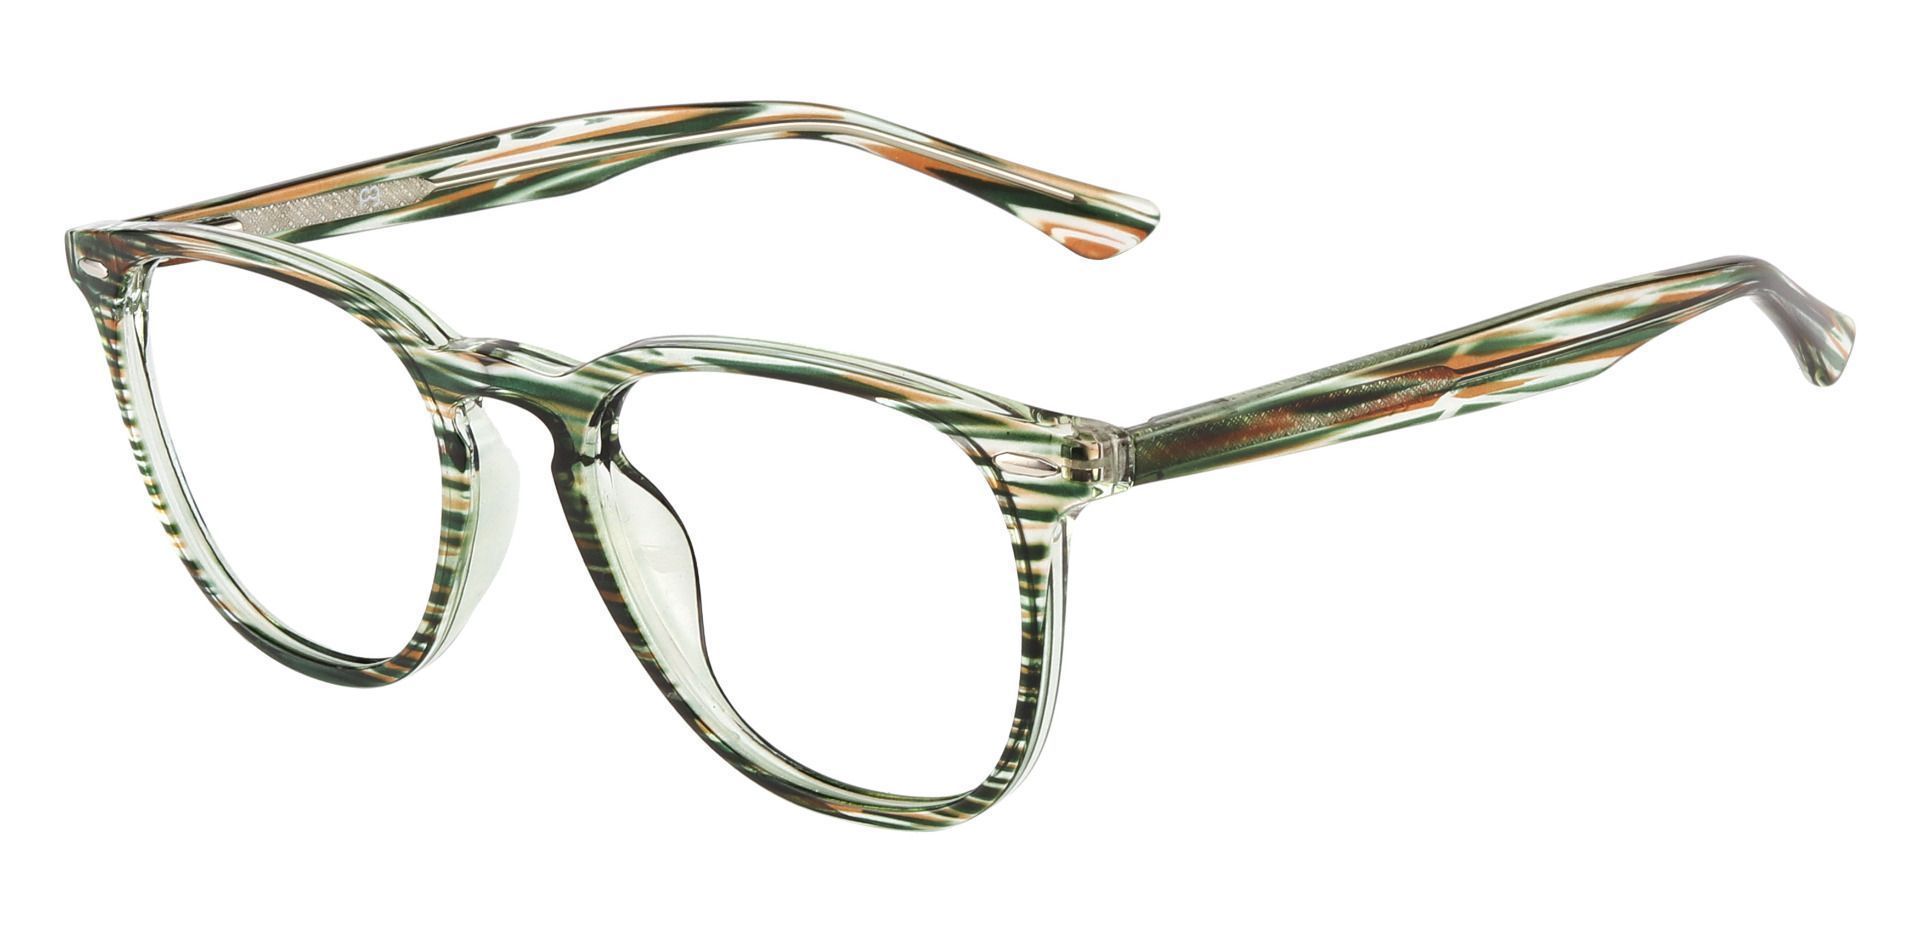 Sycamore Oval Blue Light Blocking Glasses - Green